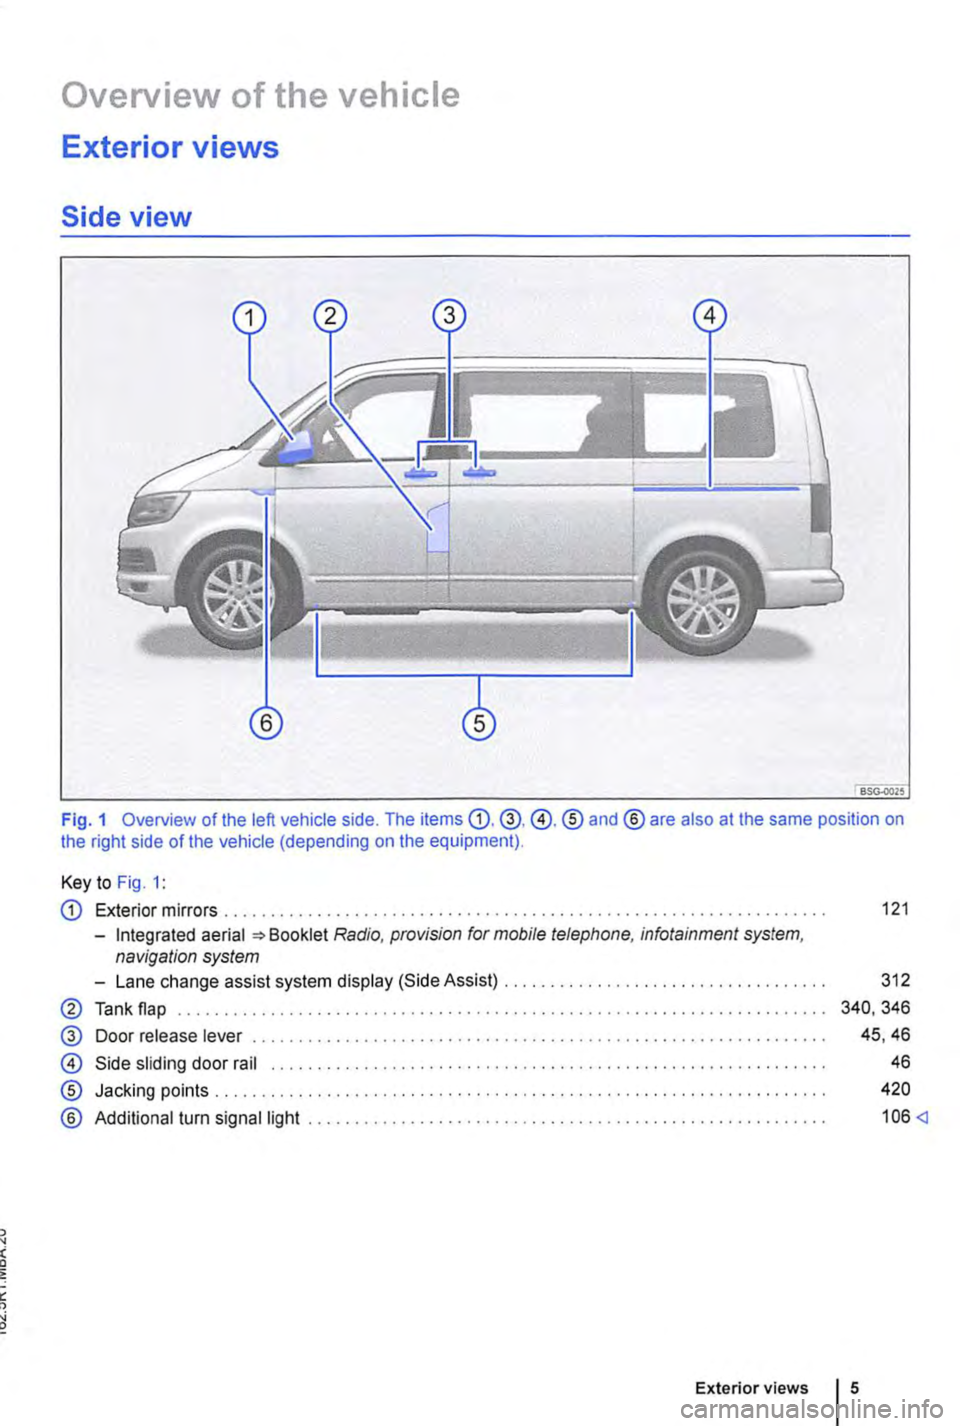 VOLKSWAGEN TRANSPORTER 2018  Owners Manual Overview of the vehicle 
Exterior views 
Side view 
Fig. 1 Overview of the left vehicle side. The items G).@,@.® and® are also at the same position on the right side of the vehicle (depending on the